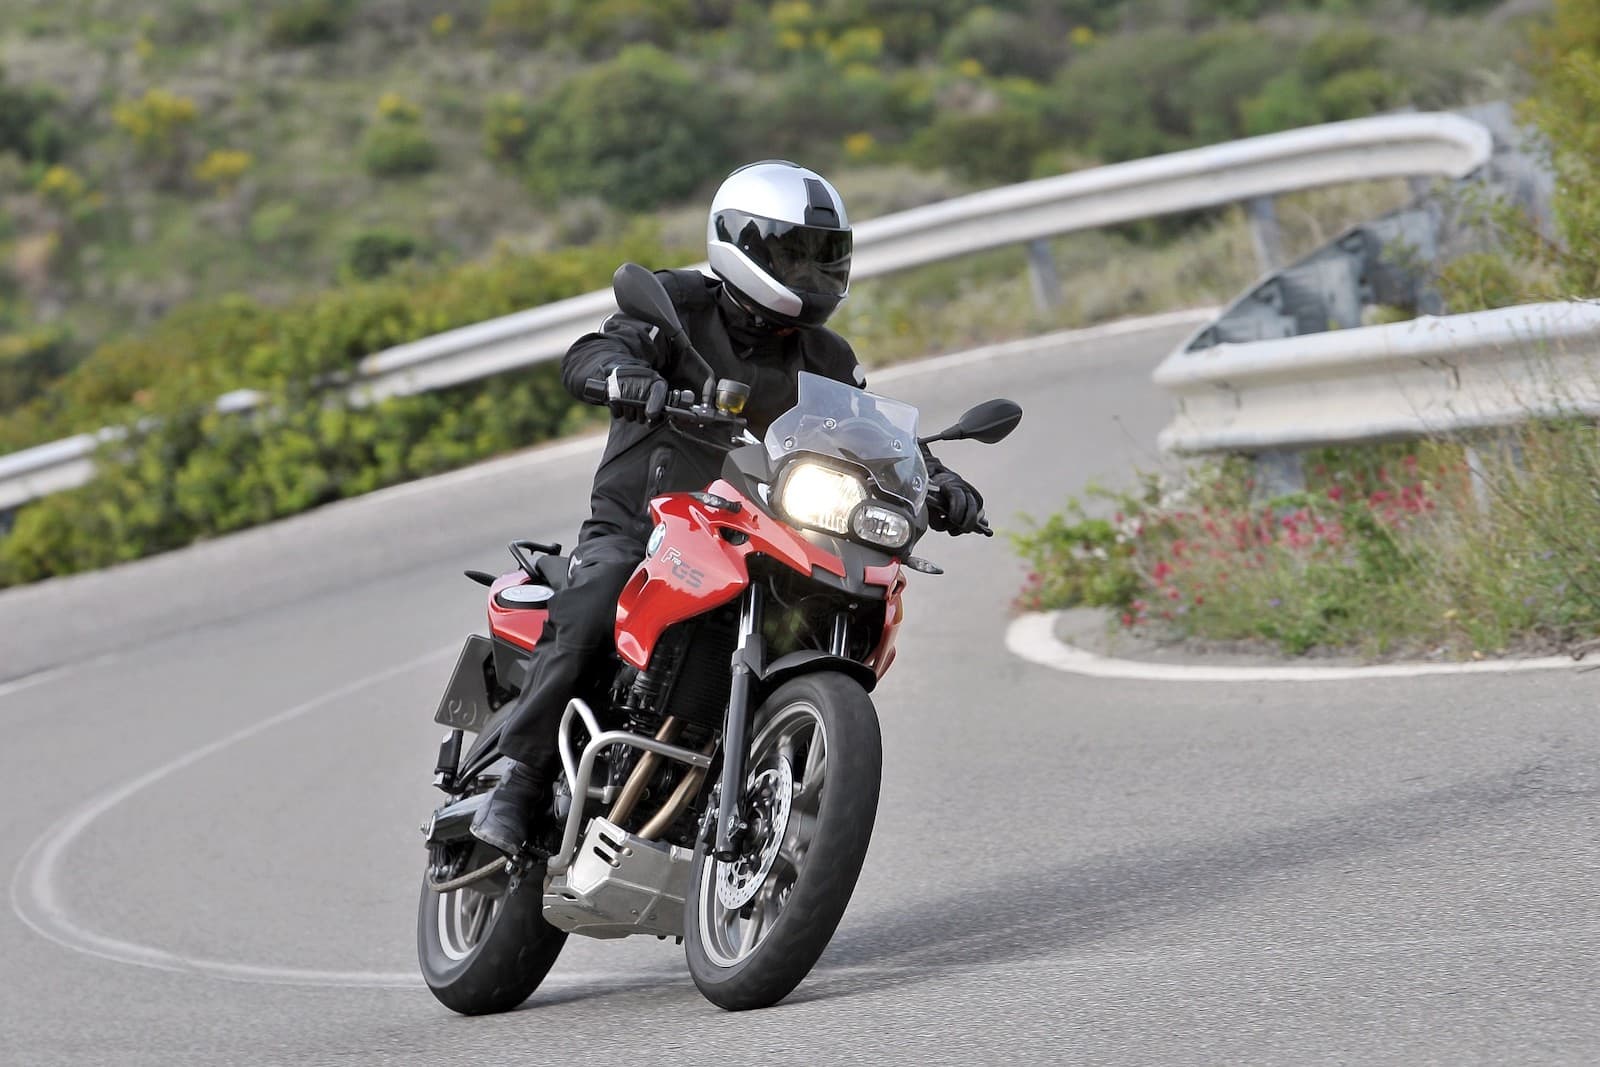 Riding BMW F 700 GS on road